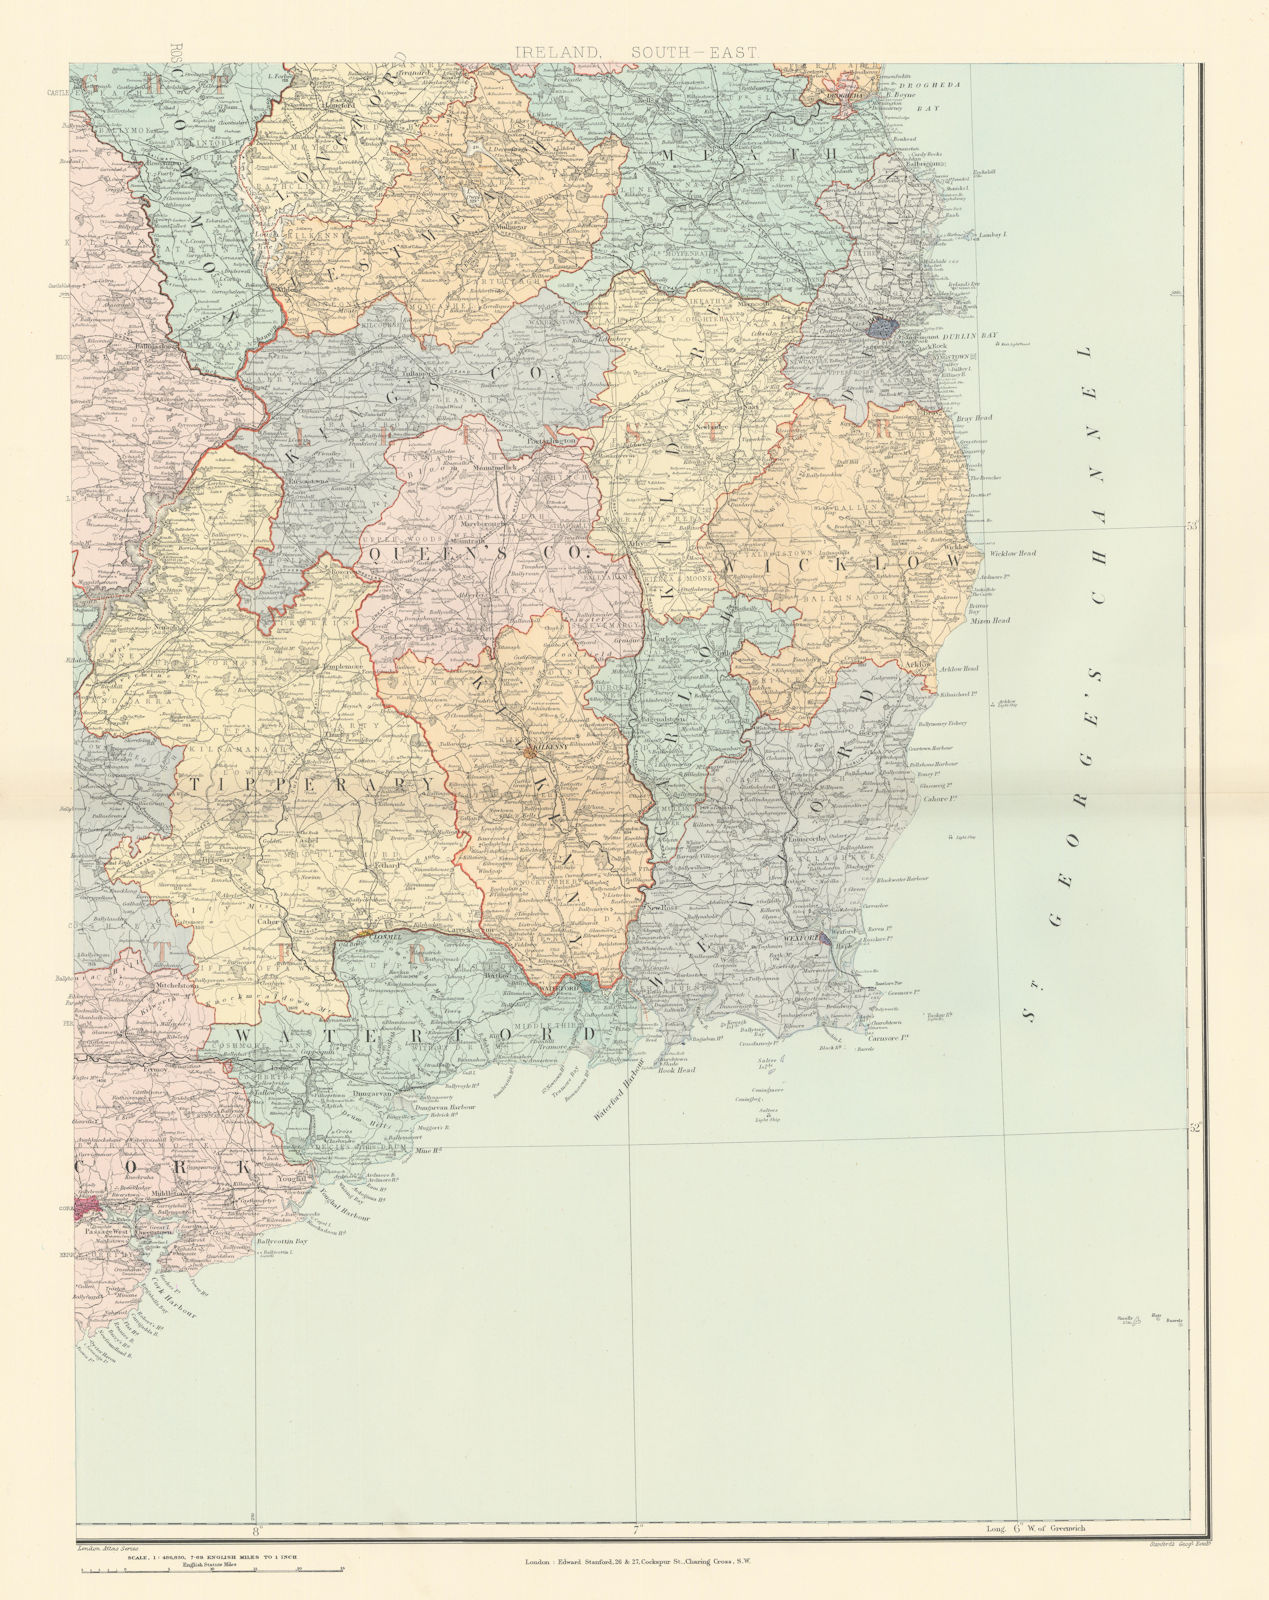 Associate Product Ireland south-east Leinster Kildare Wicklow Dublin Tipperary. STANFORD 1896 map